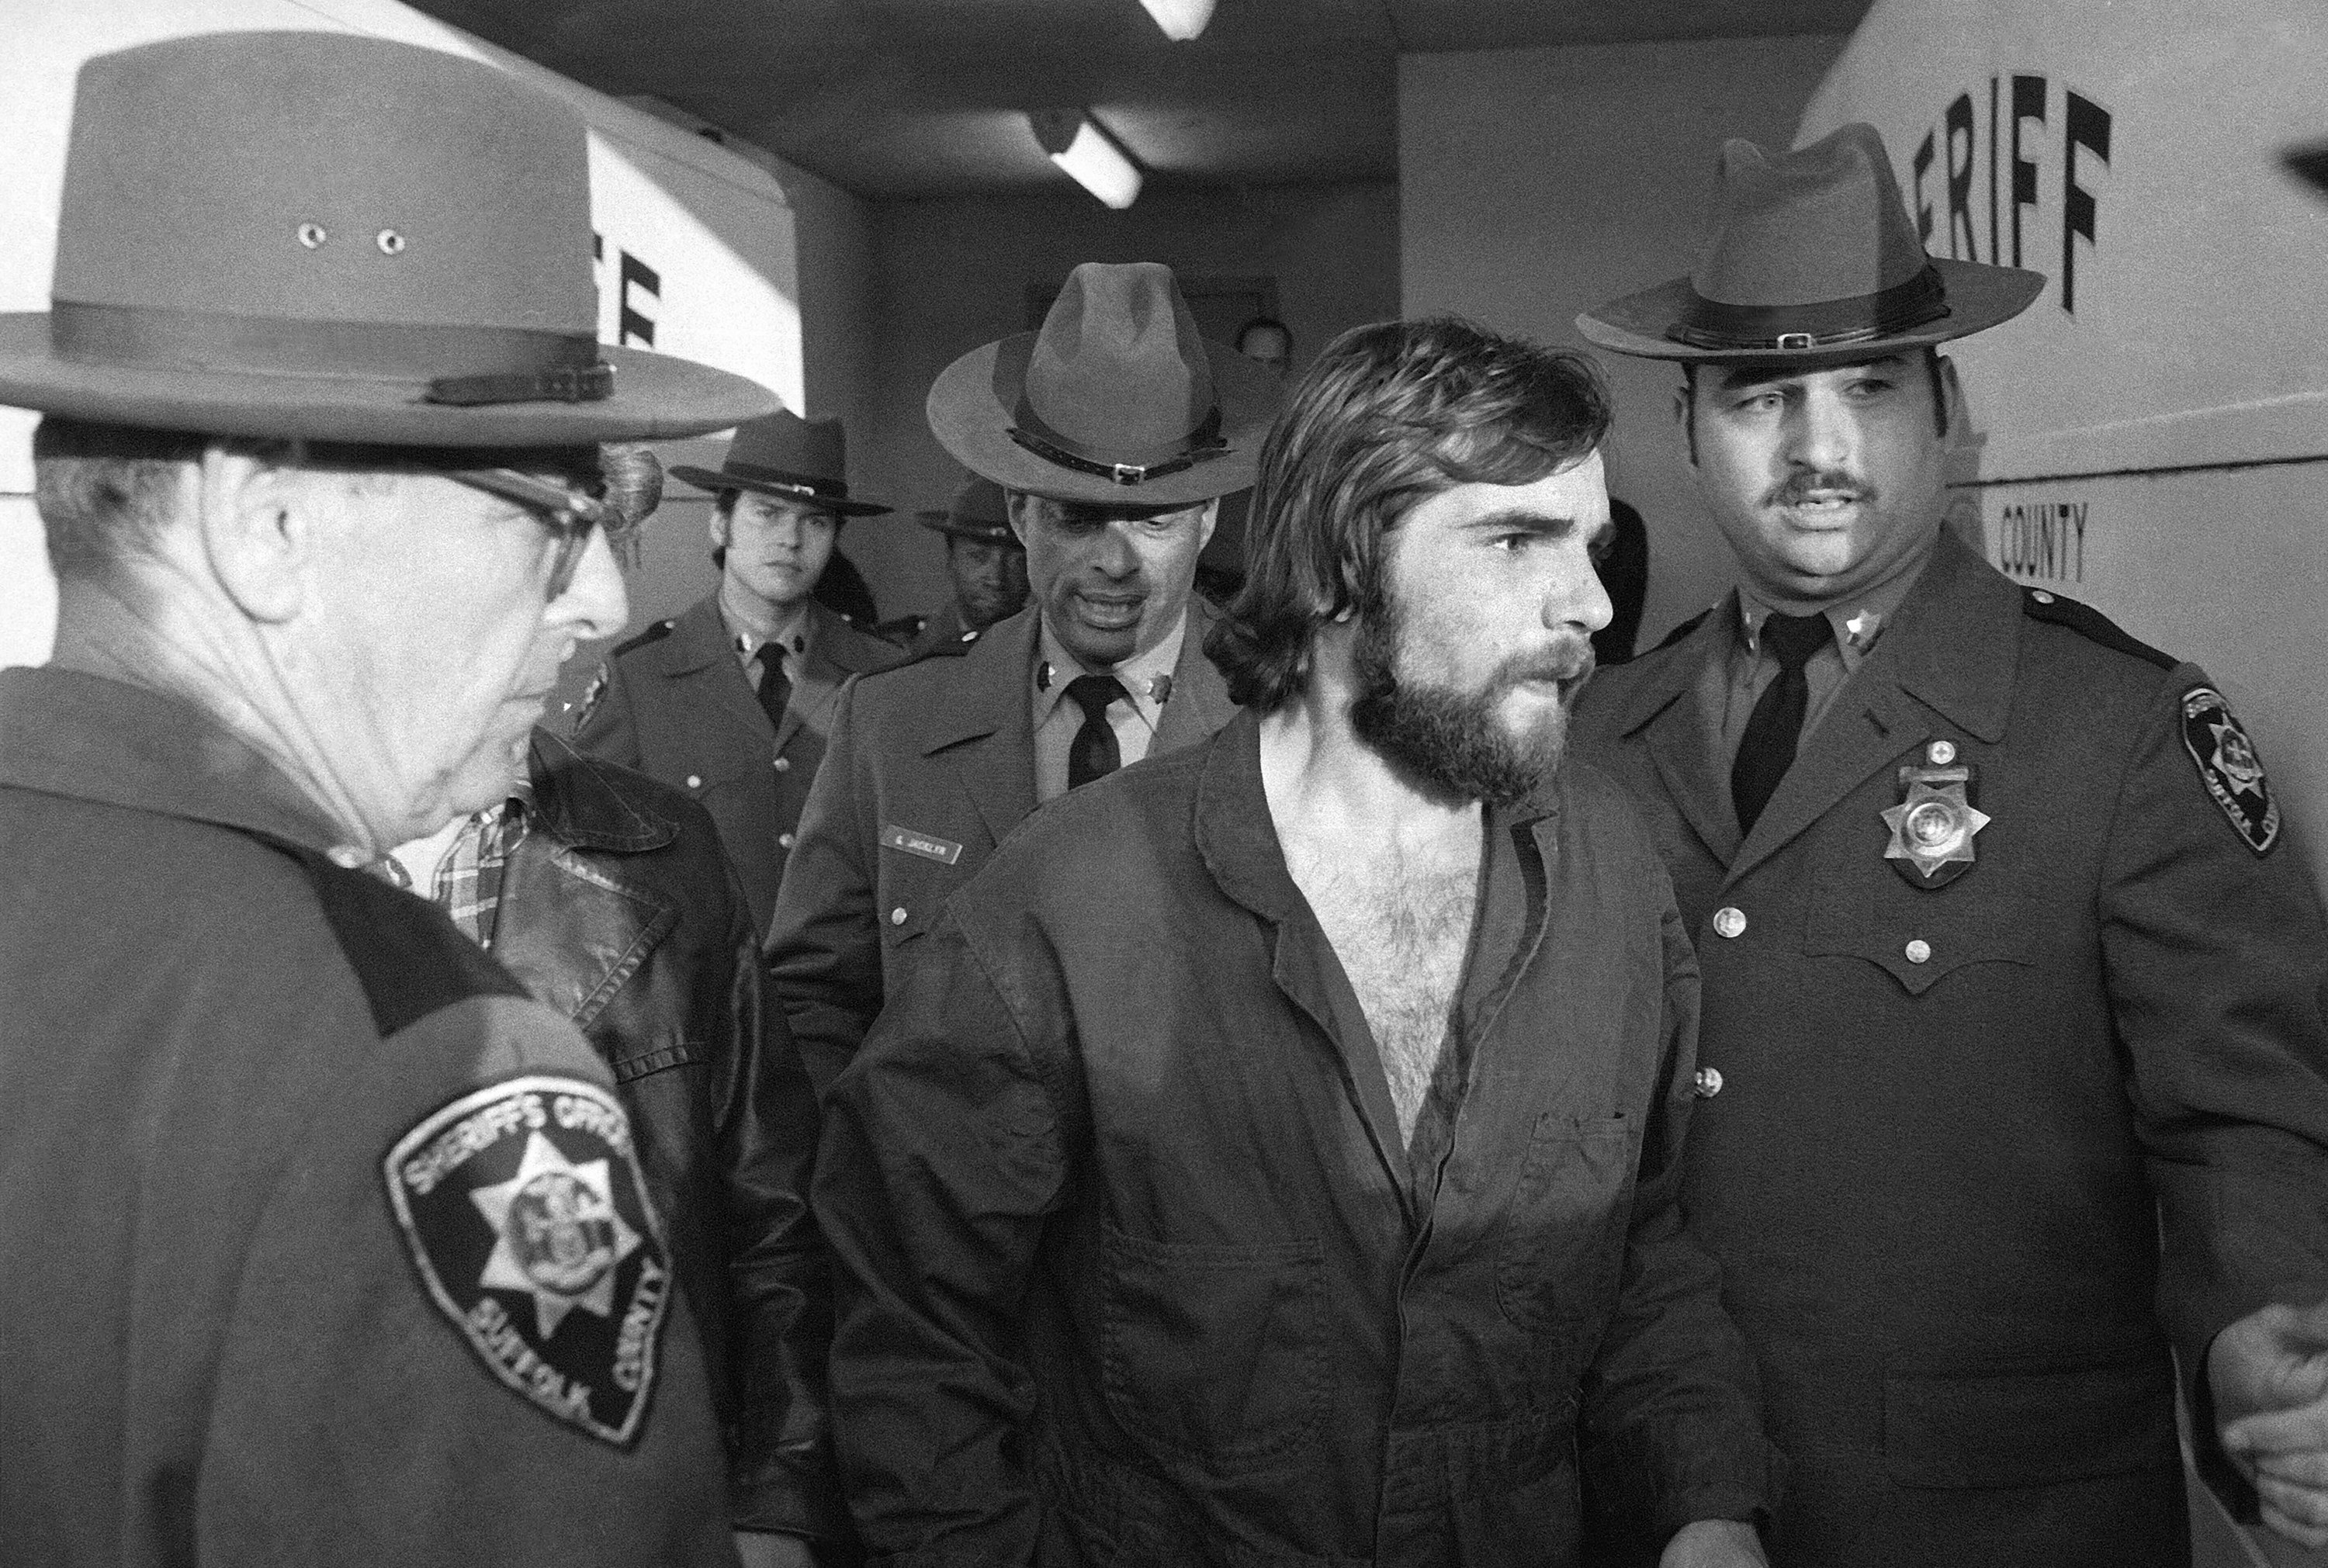 DeFeo, a murderer convicted in the Amityville Horror case, dies